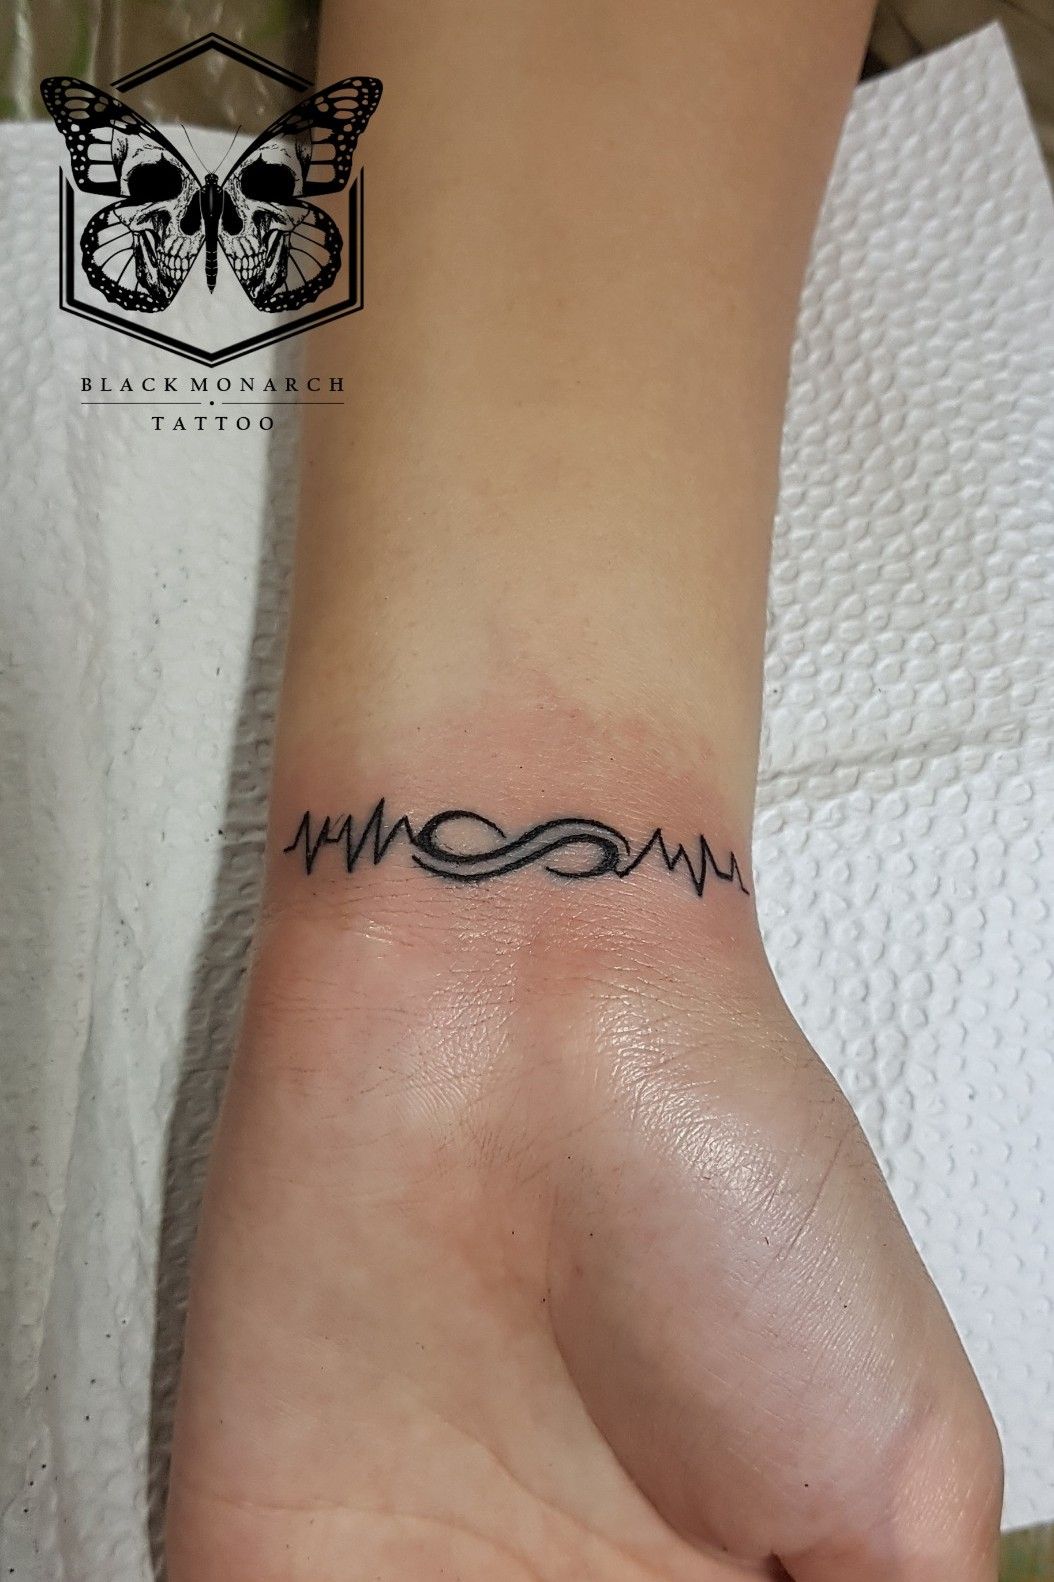 100 Infinity Tattoo Ideas to Symbolize Your Eternal Love  Art and Design